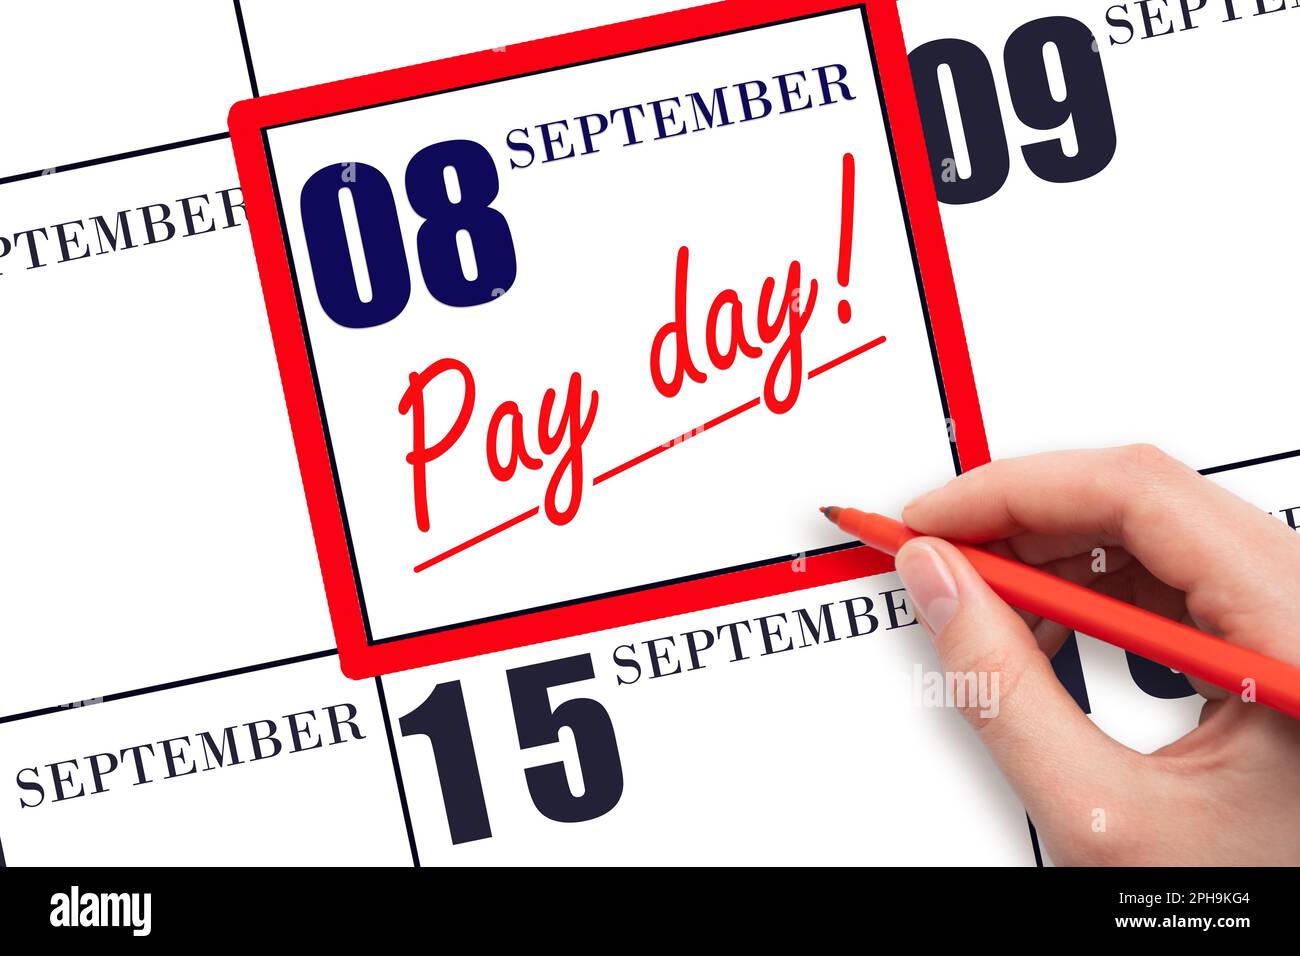 8th day of September. Hand writing text PAY DATE on calendar date September  8 and underline it. Payment due date.  Reminder concept of payment. Autum Stock Photo